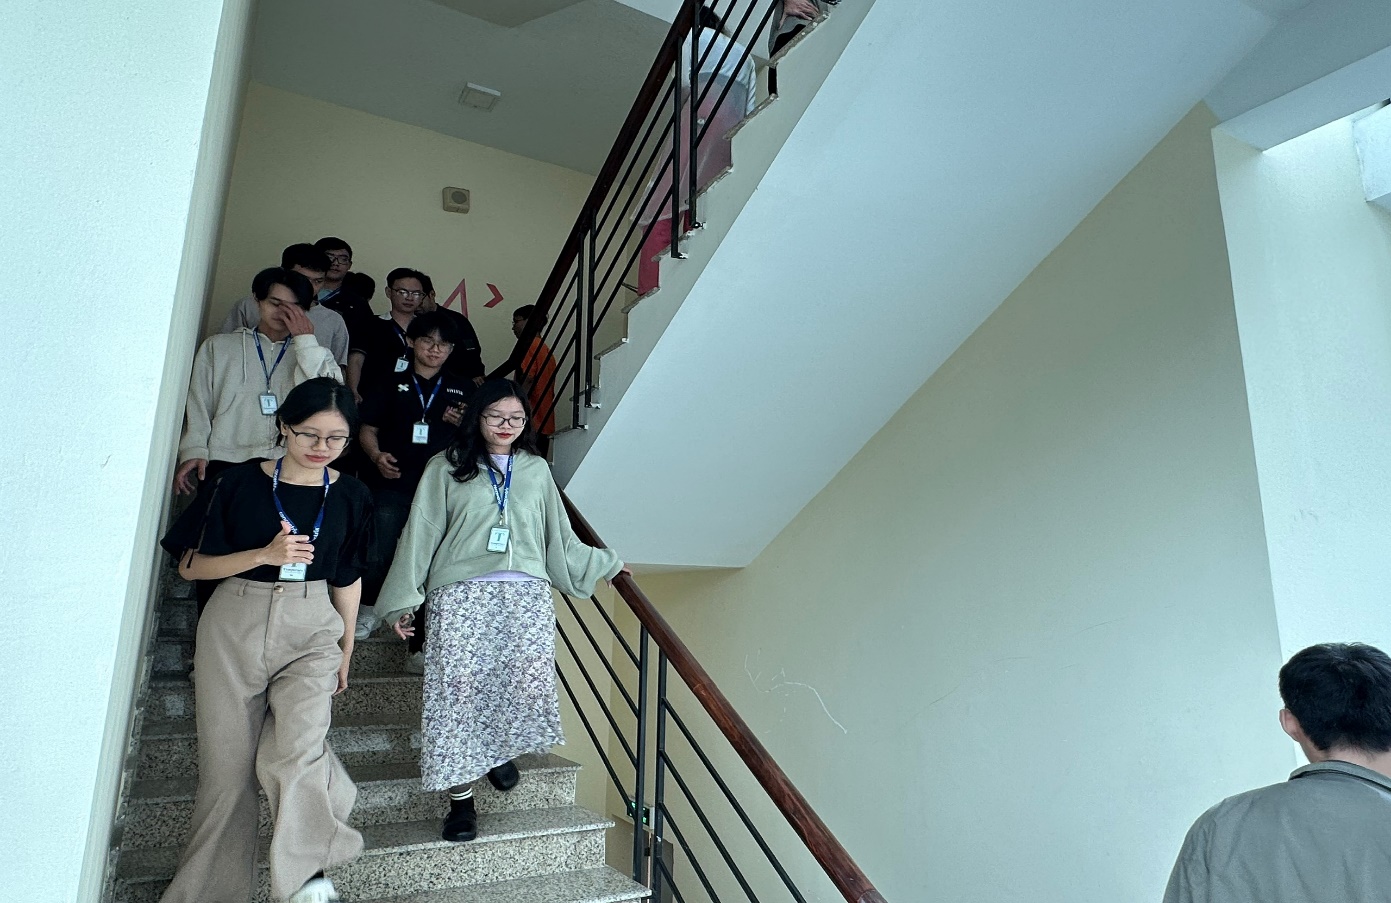 Employees evacuating via stairways to the designated assembly point outside the building